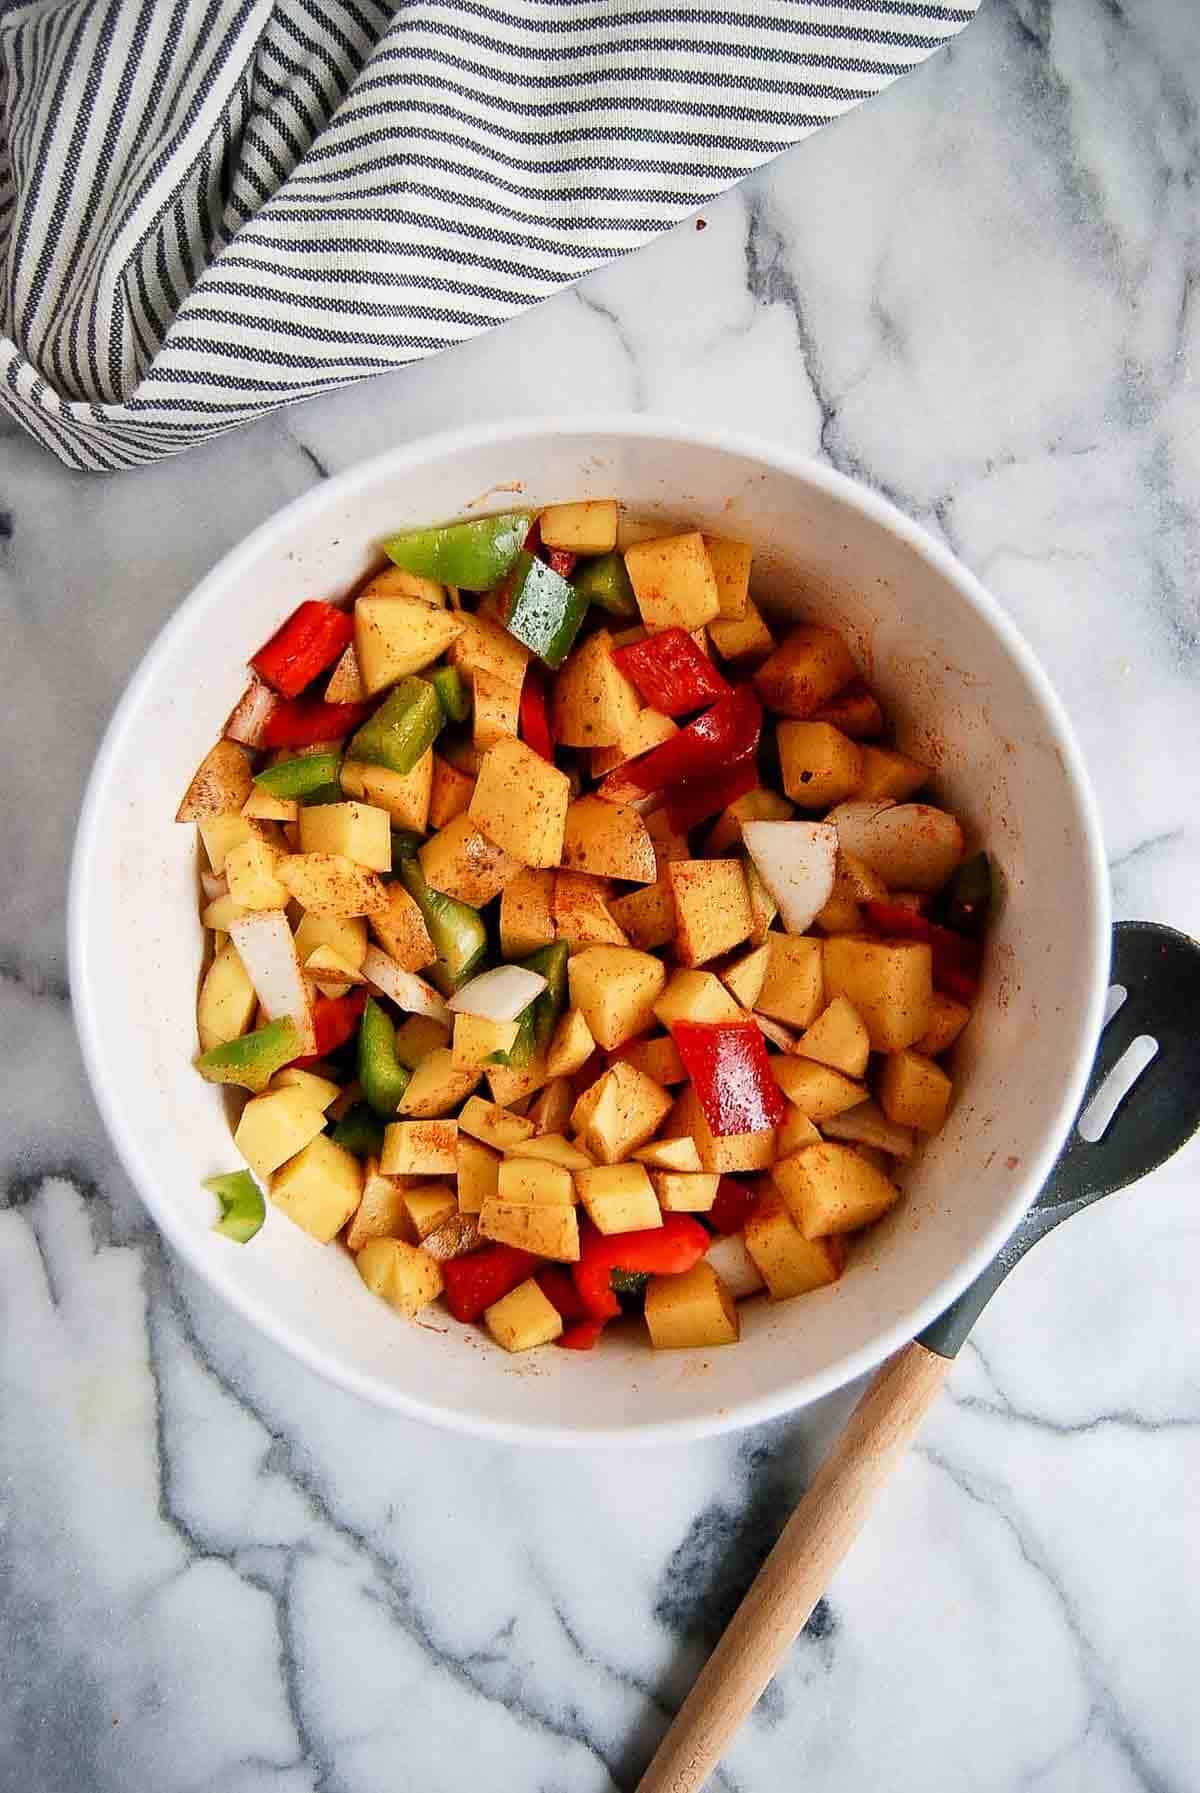 diced potatoes, onion, red and green pepper with spices in bowl.